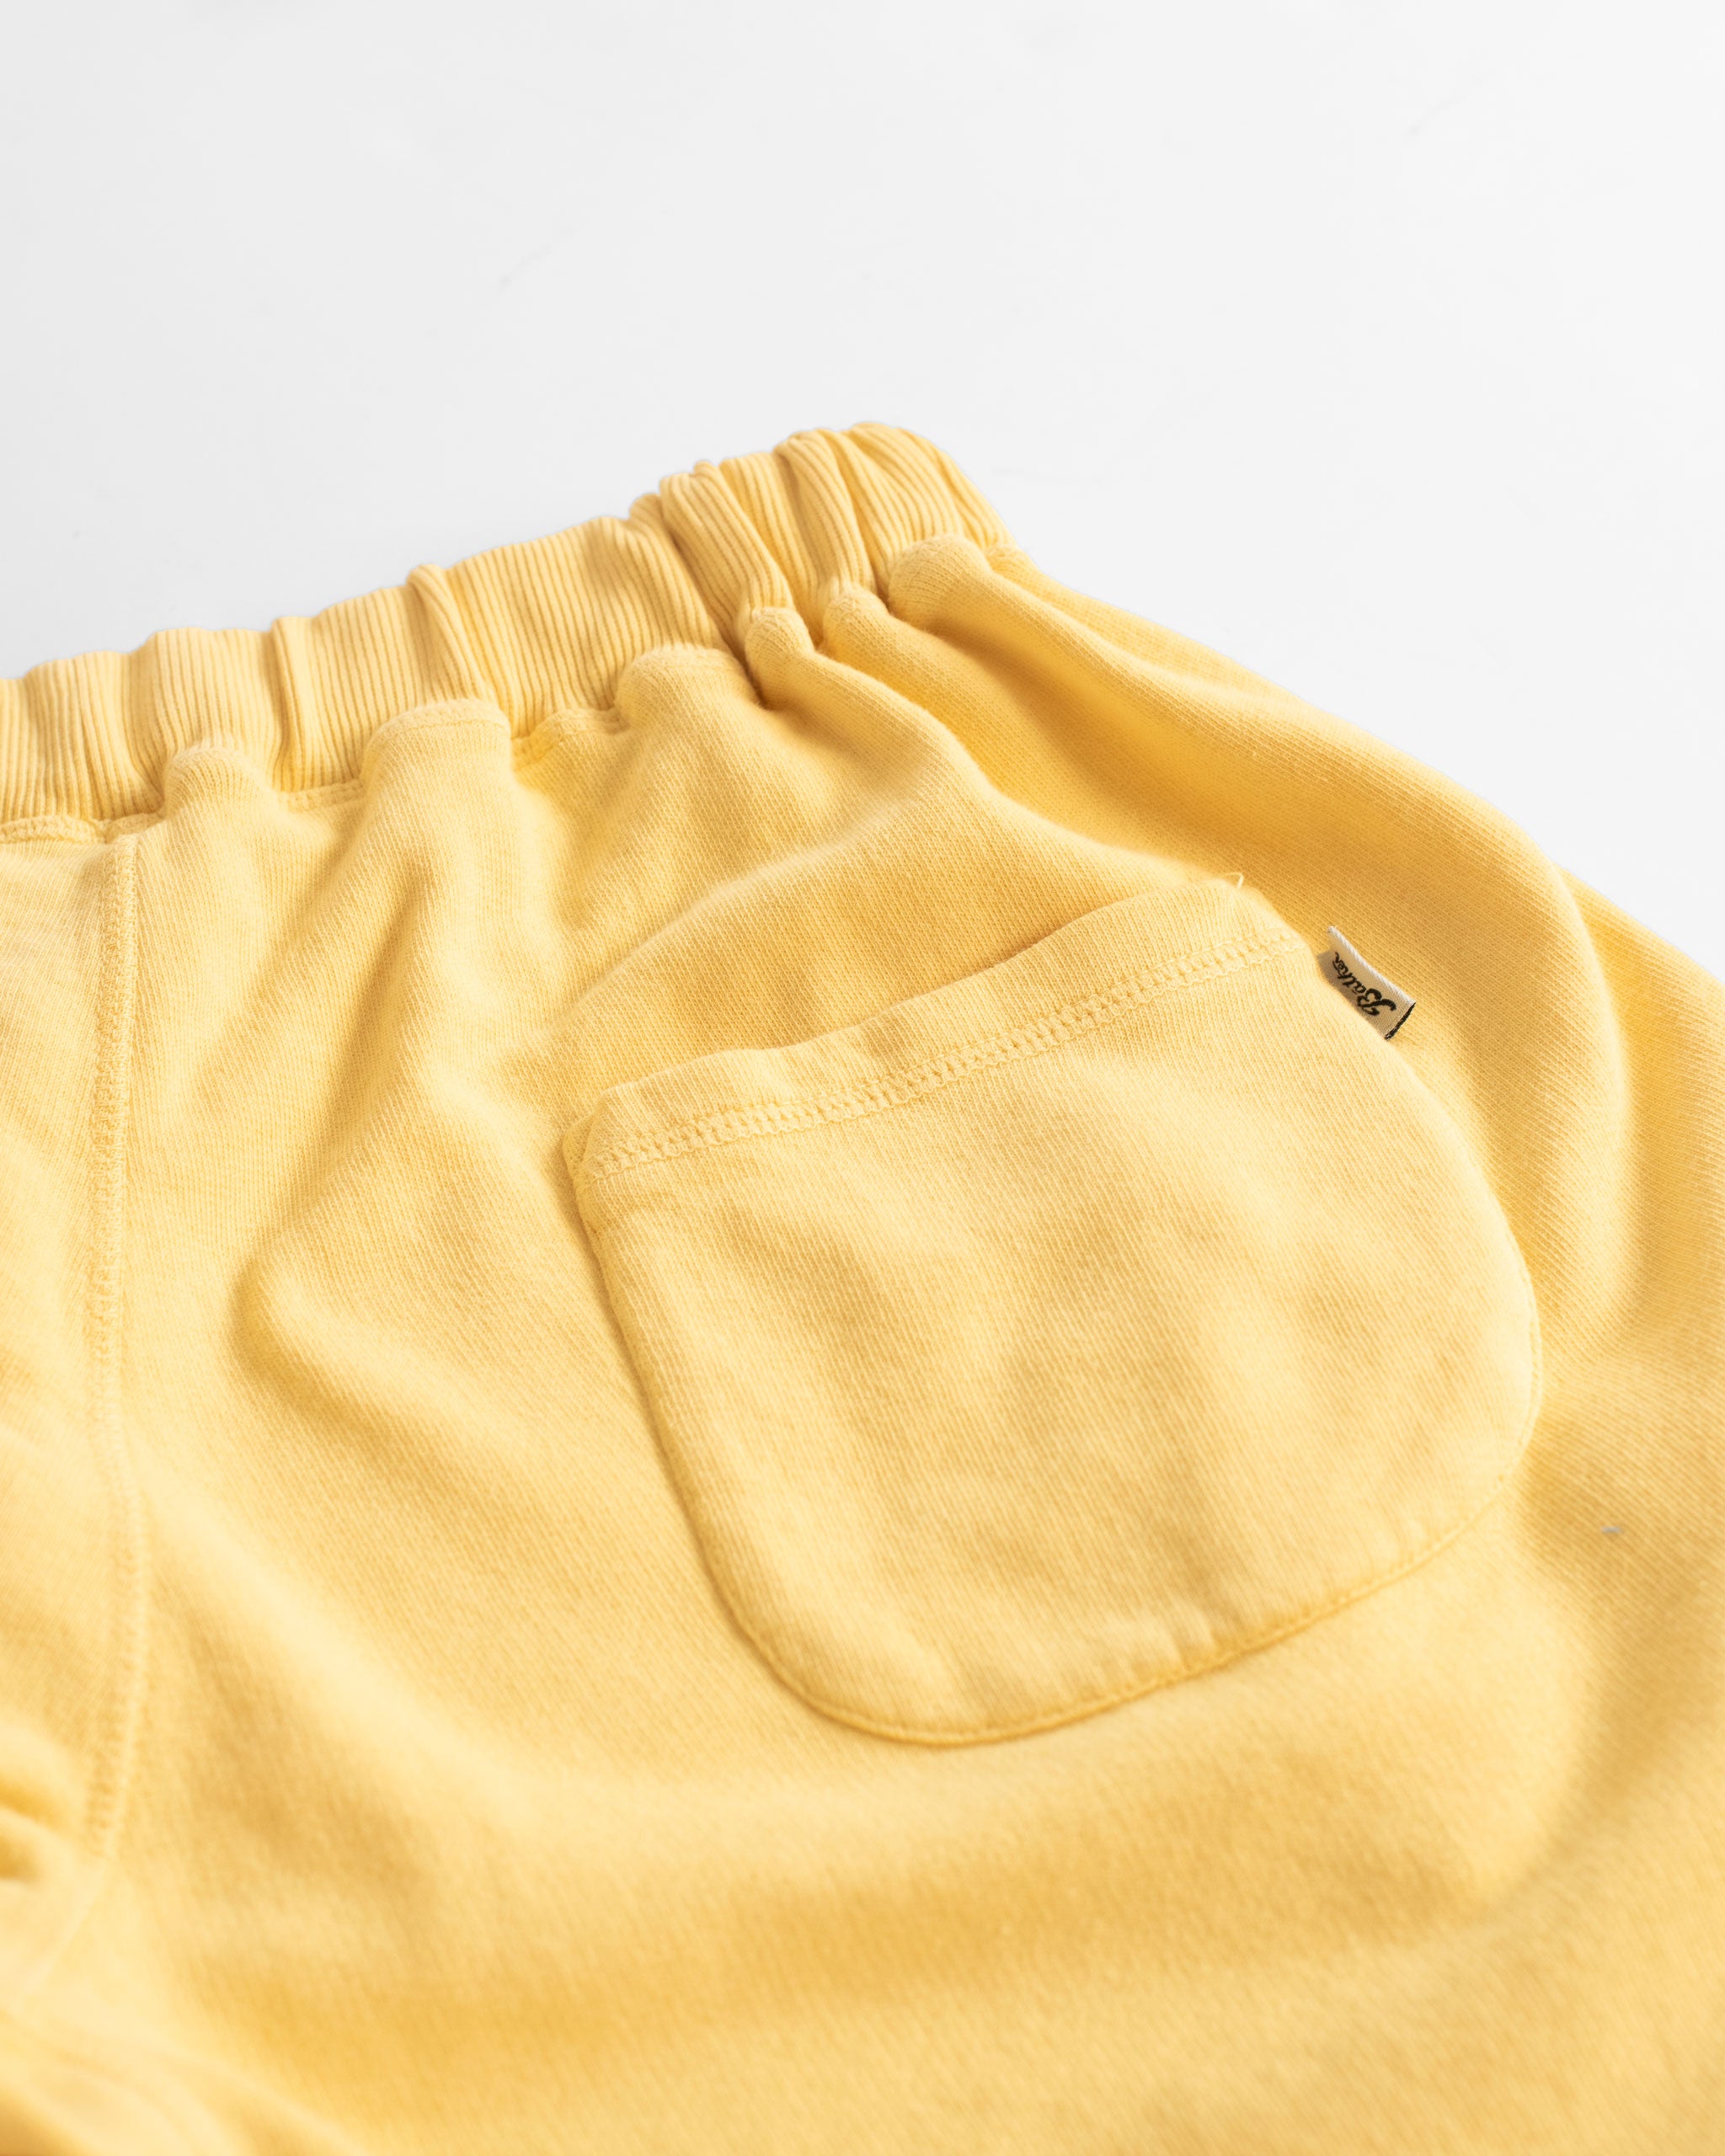 Back pocket close up of Canary yellow french terry sweat shorts